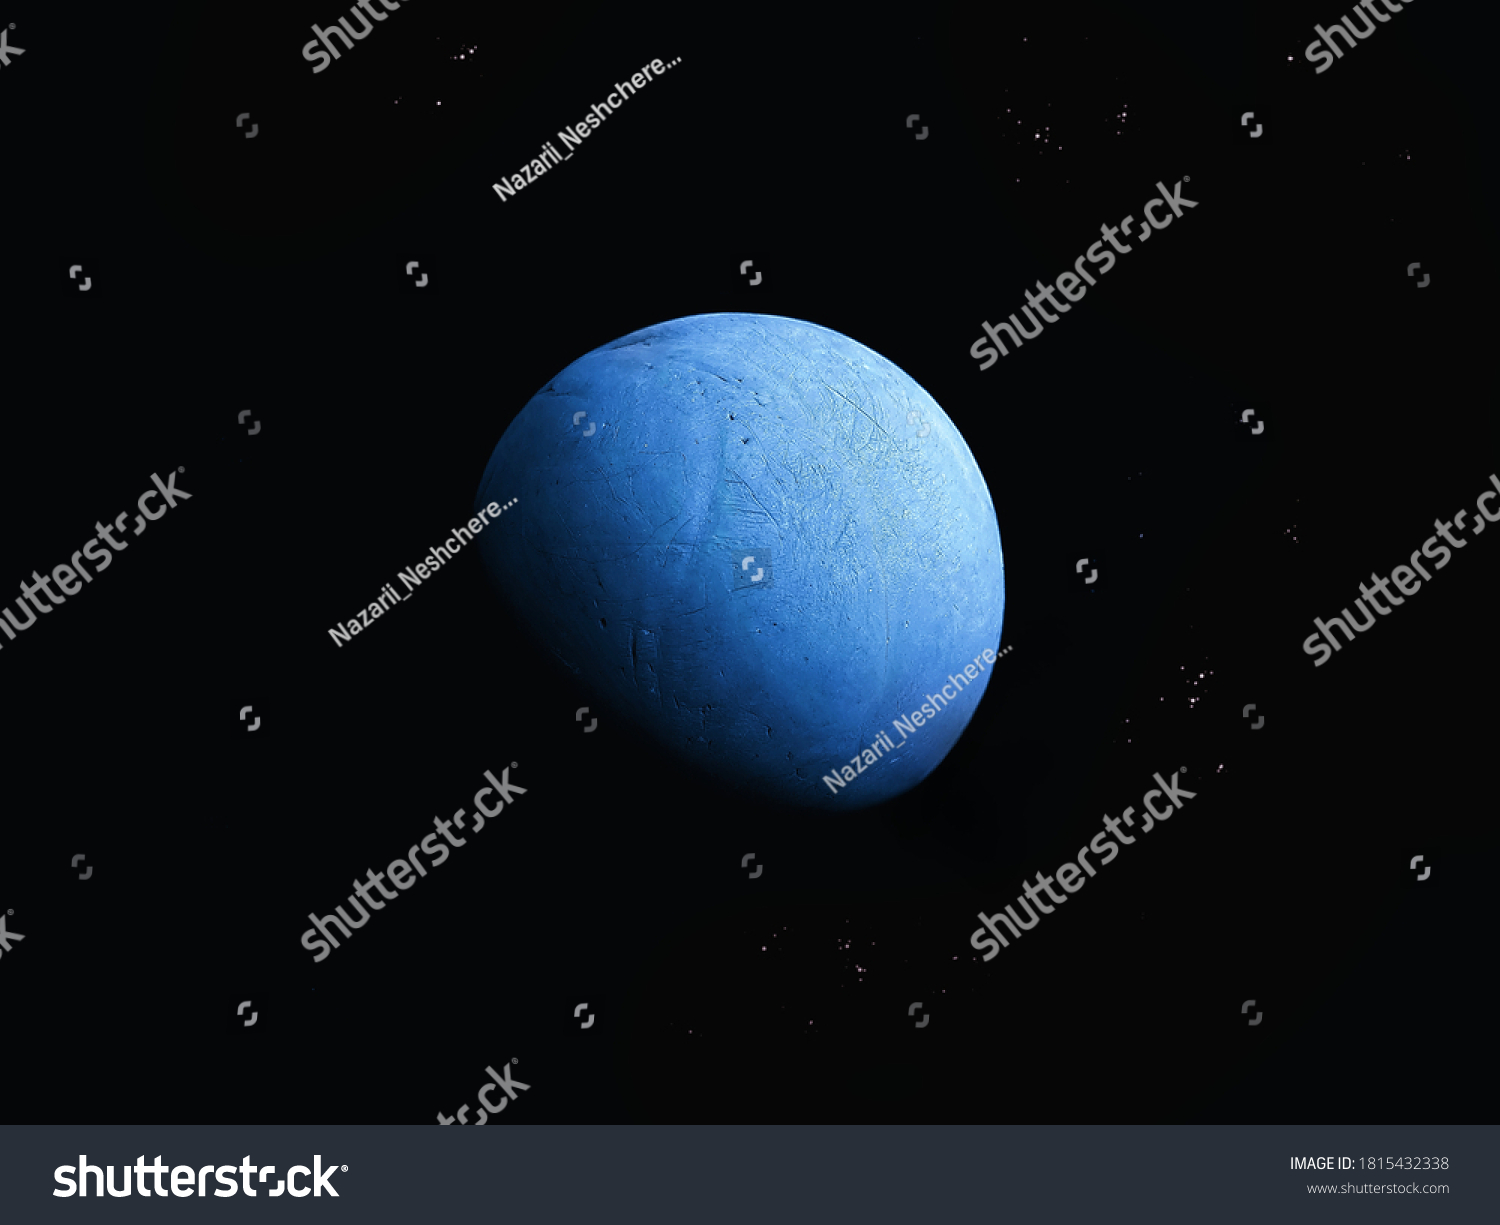 Blue planet with water and atmosphere in space with stars. #1815432338